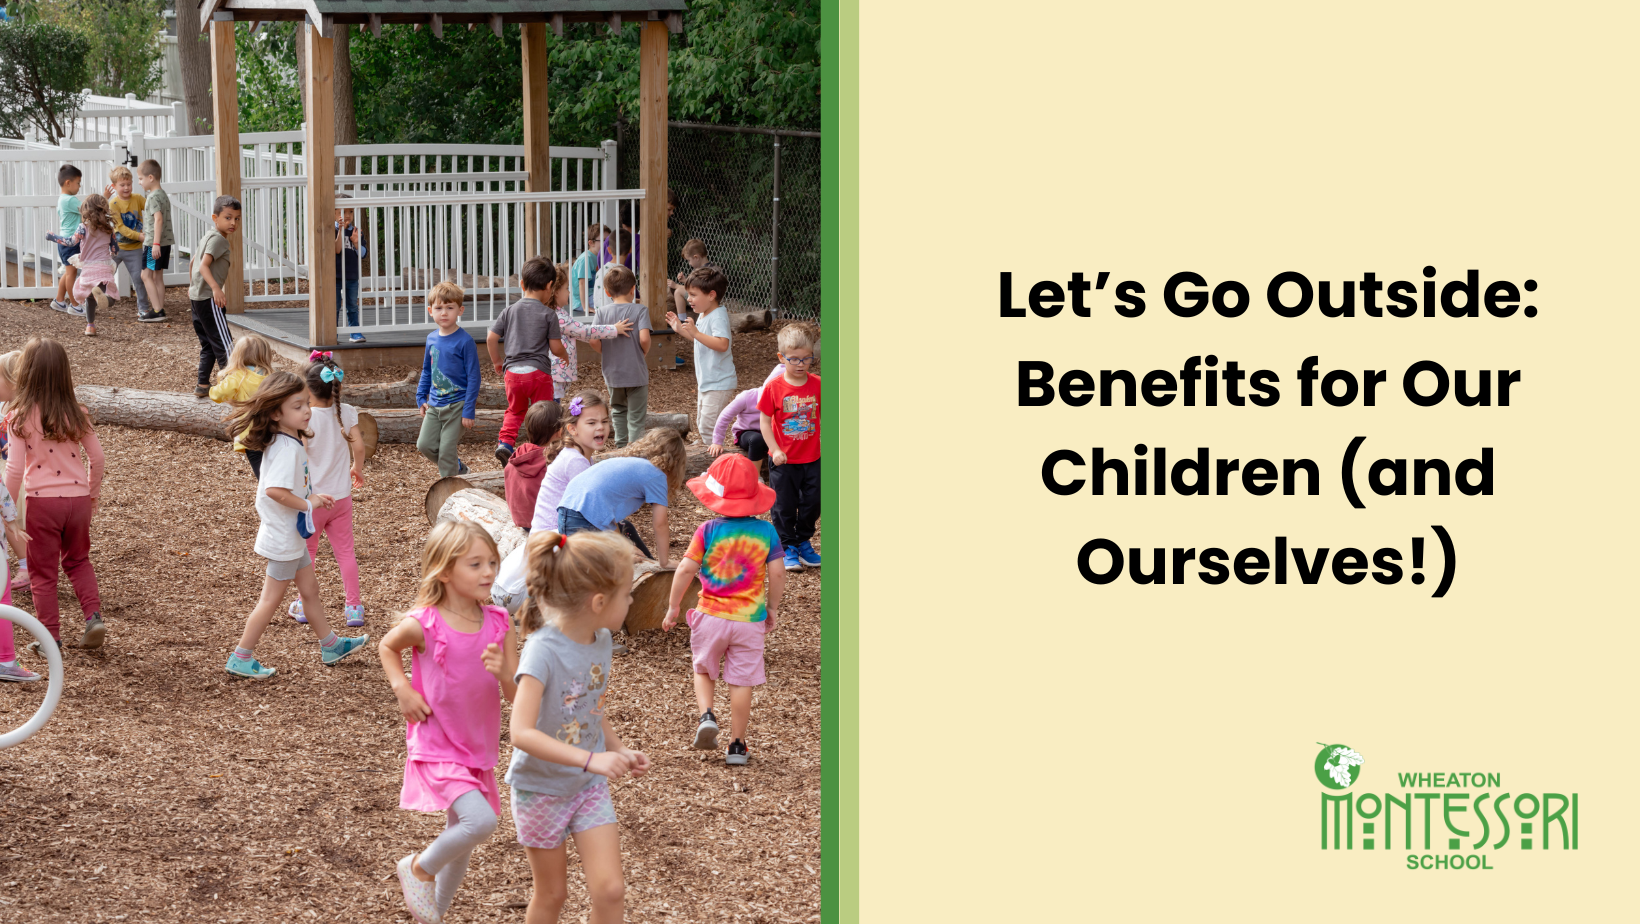 Let’s Go Outside: Benefits for Our Children (and Ourselves!)